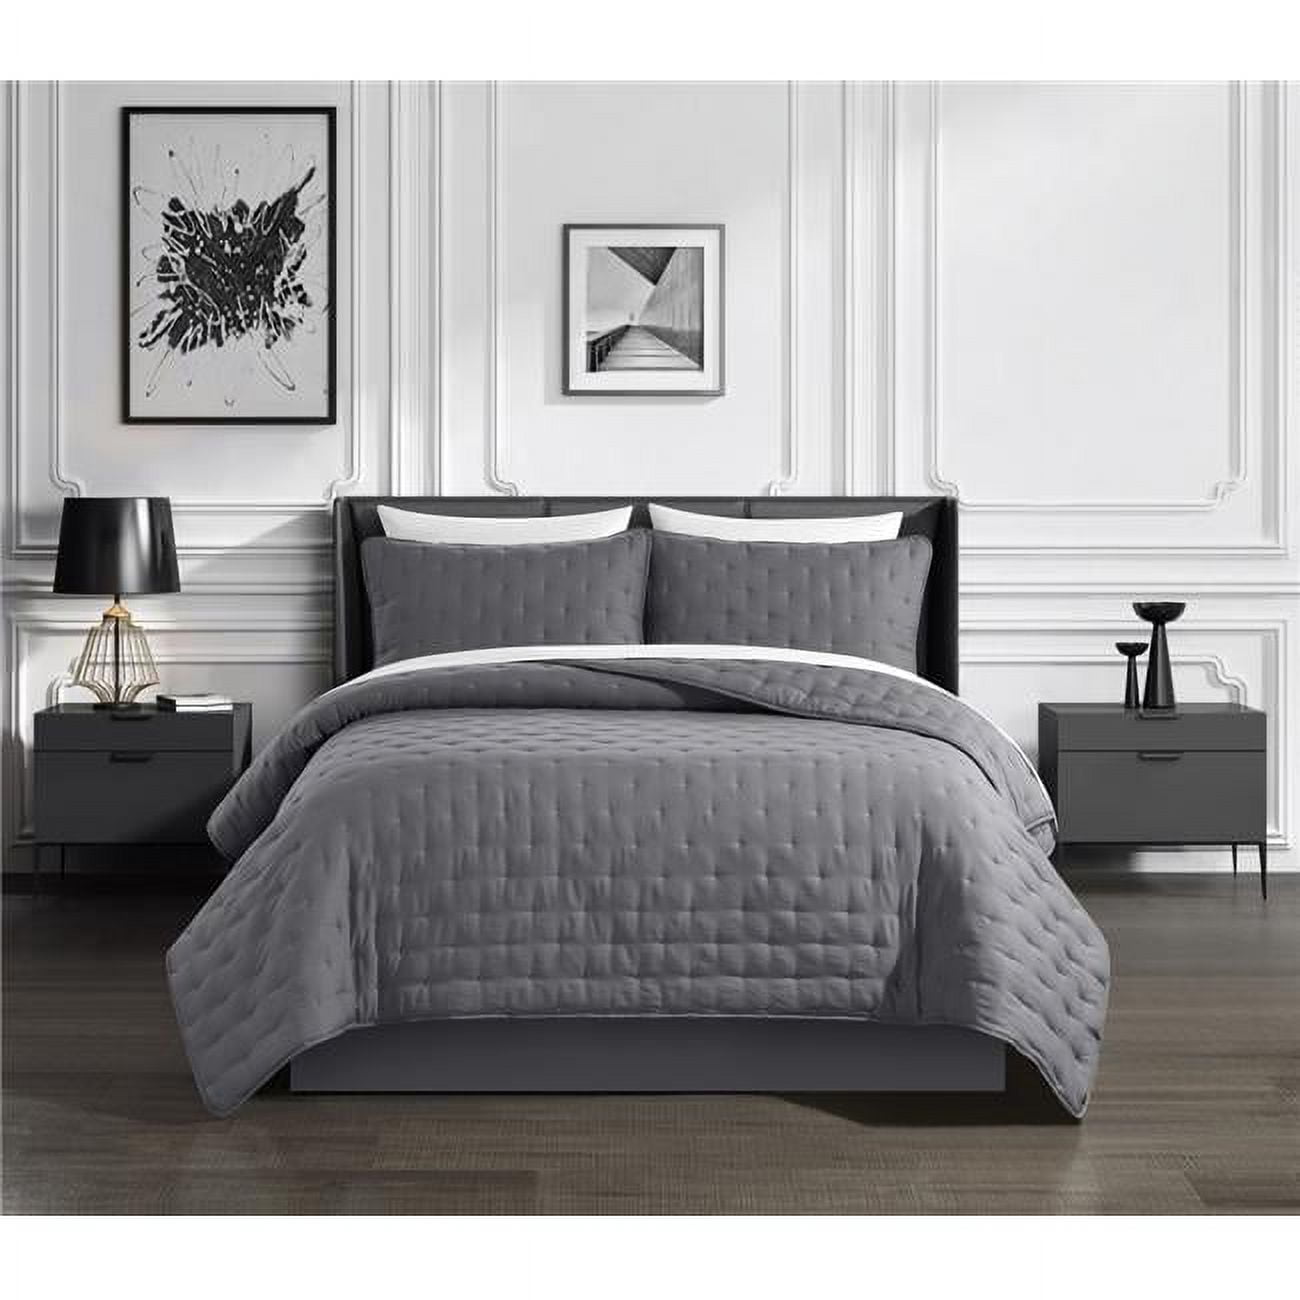 Picture of Chic Home BQS19301-BIB-US Kaceyn 7 Piece Quilt Set with Tufted Cross Stitched Design Bed in A Bag - Sheet Set Pillow Shams&#44; Grey - King Size